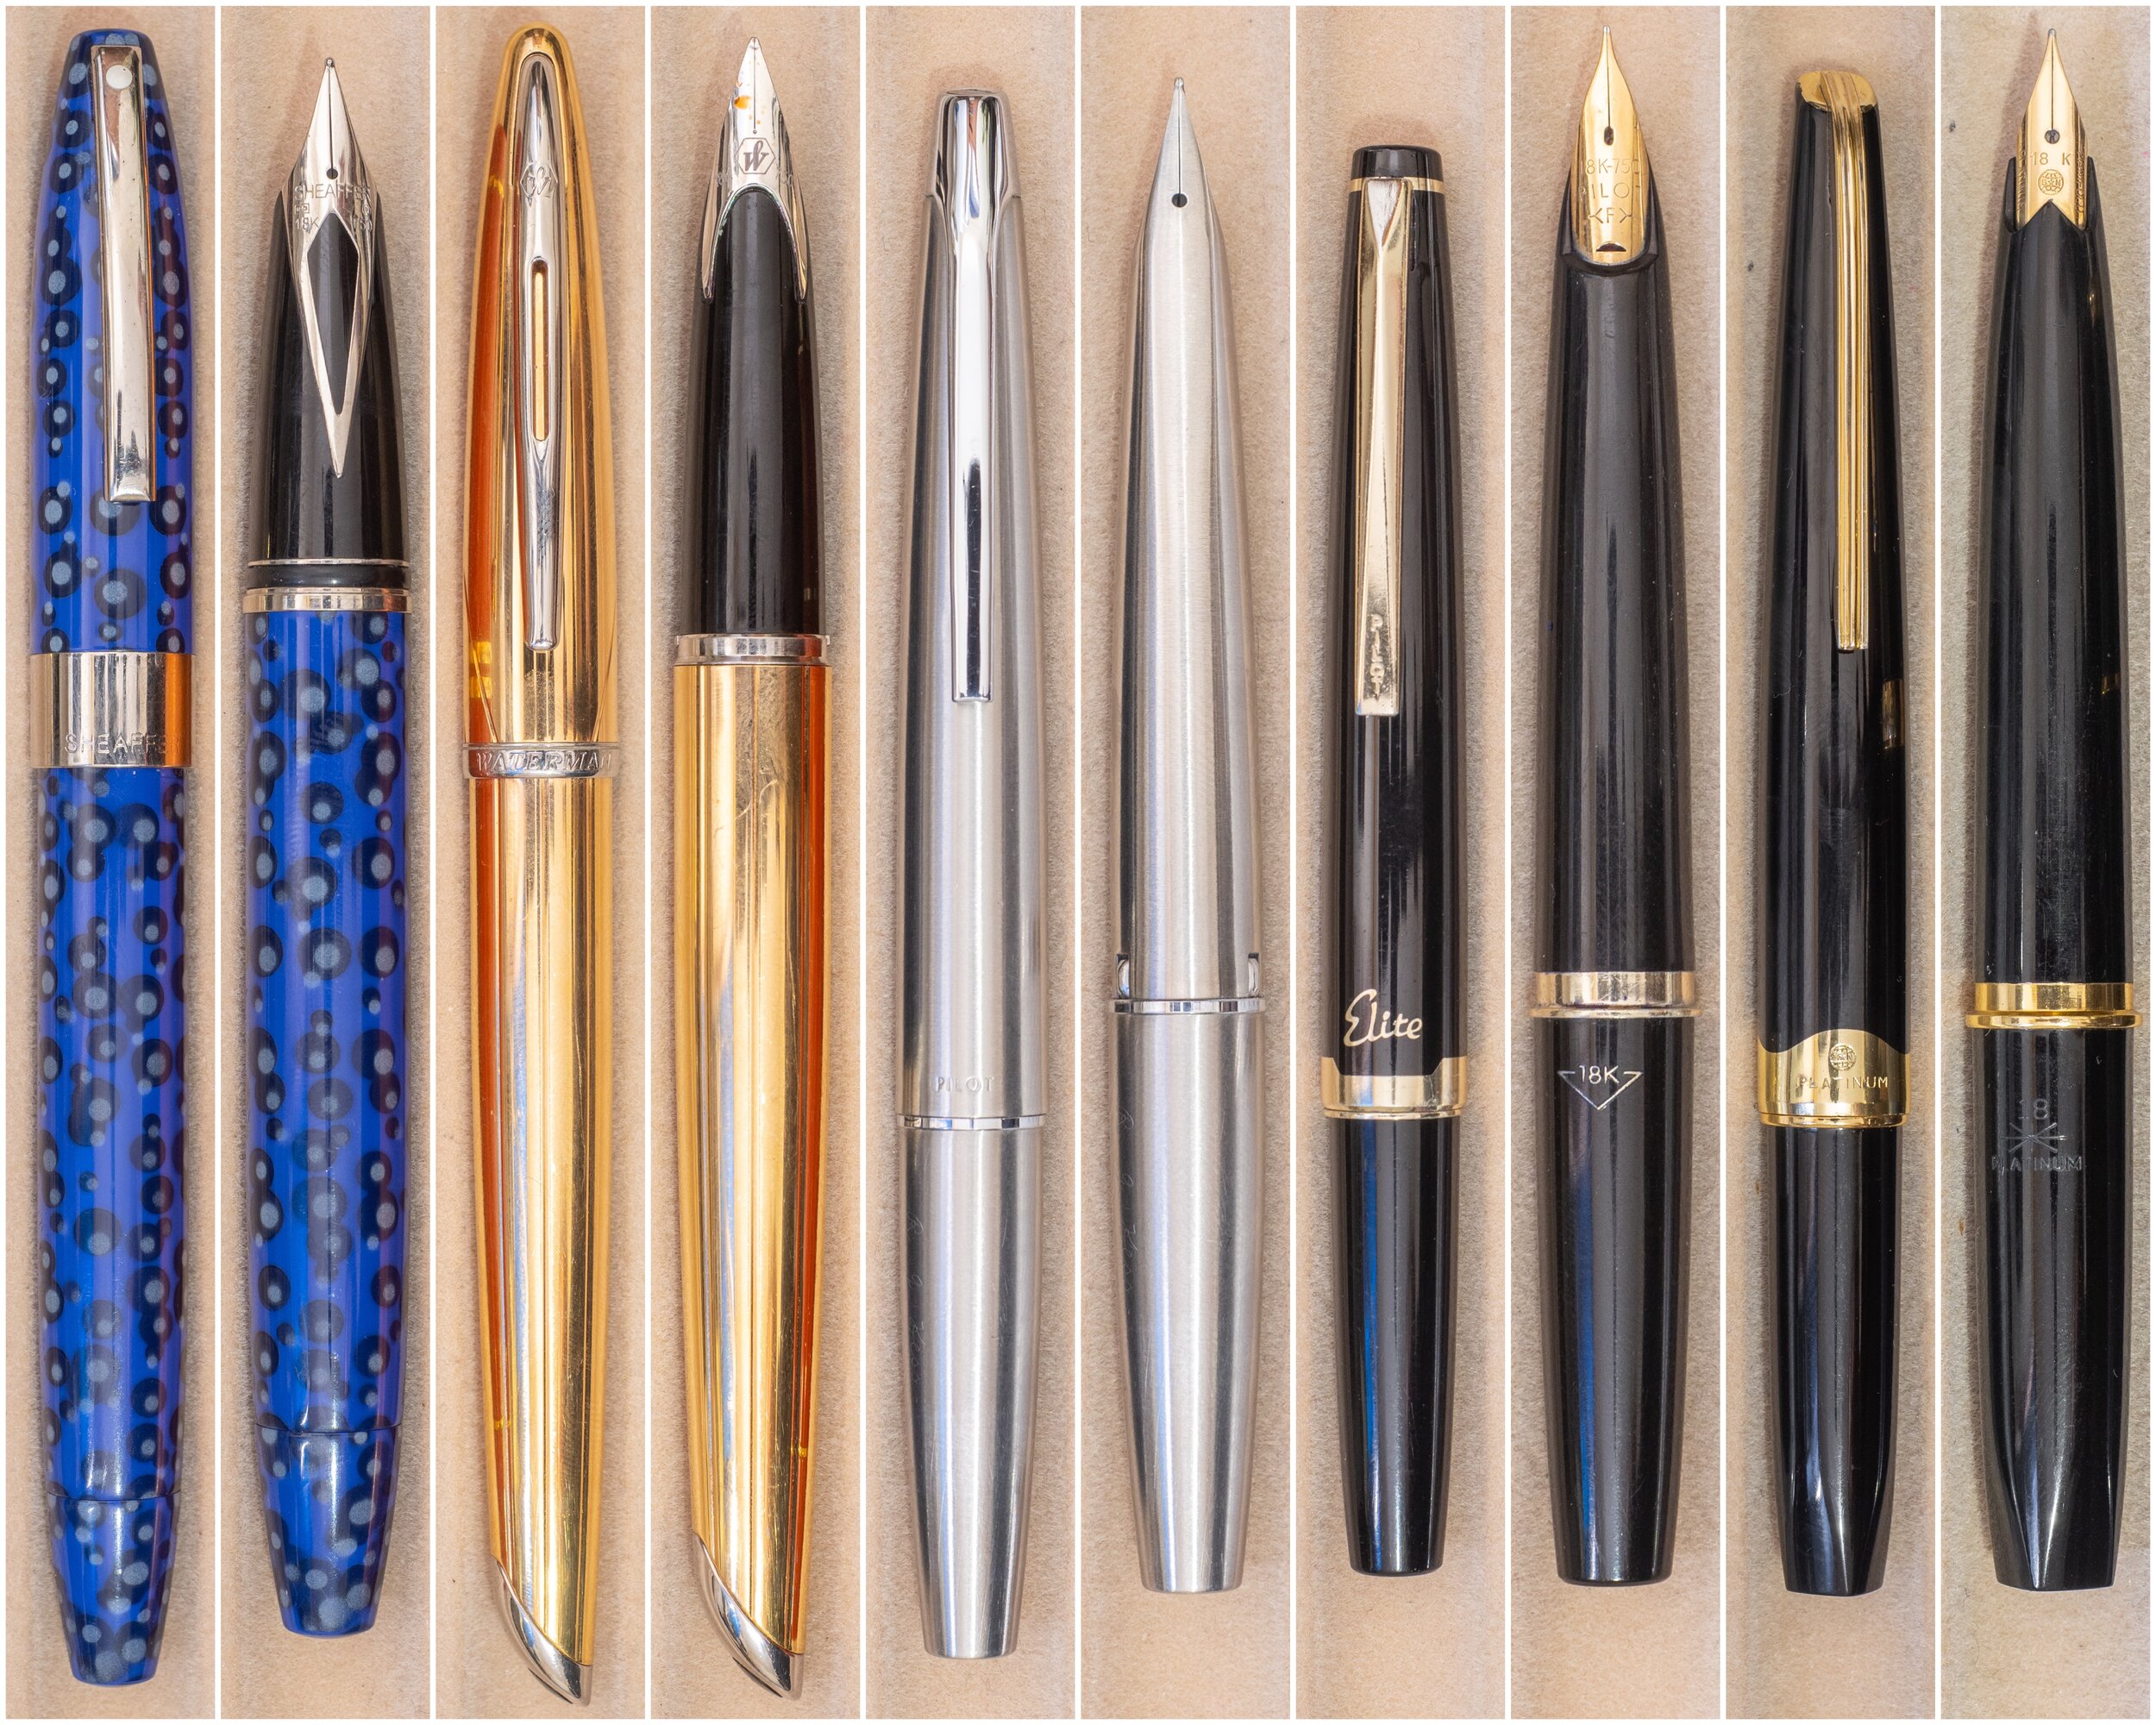 Stationery Anker International Fountain Pen with 4 Ink Cart 